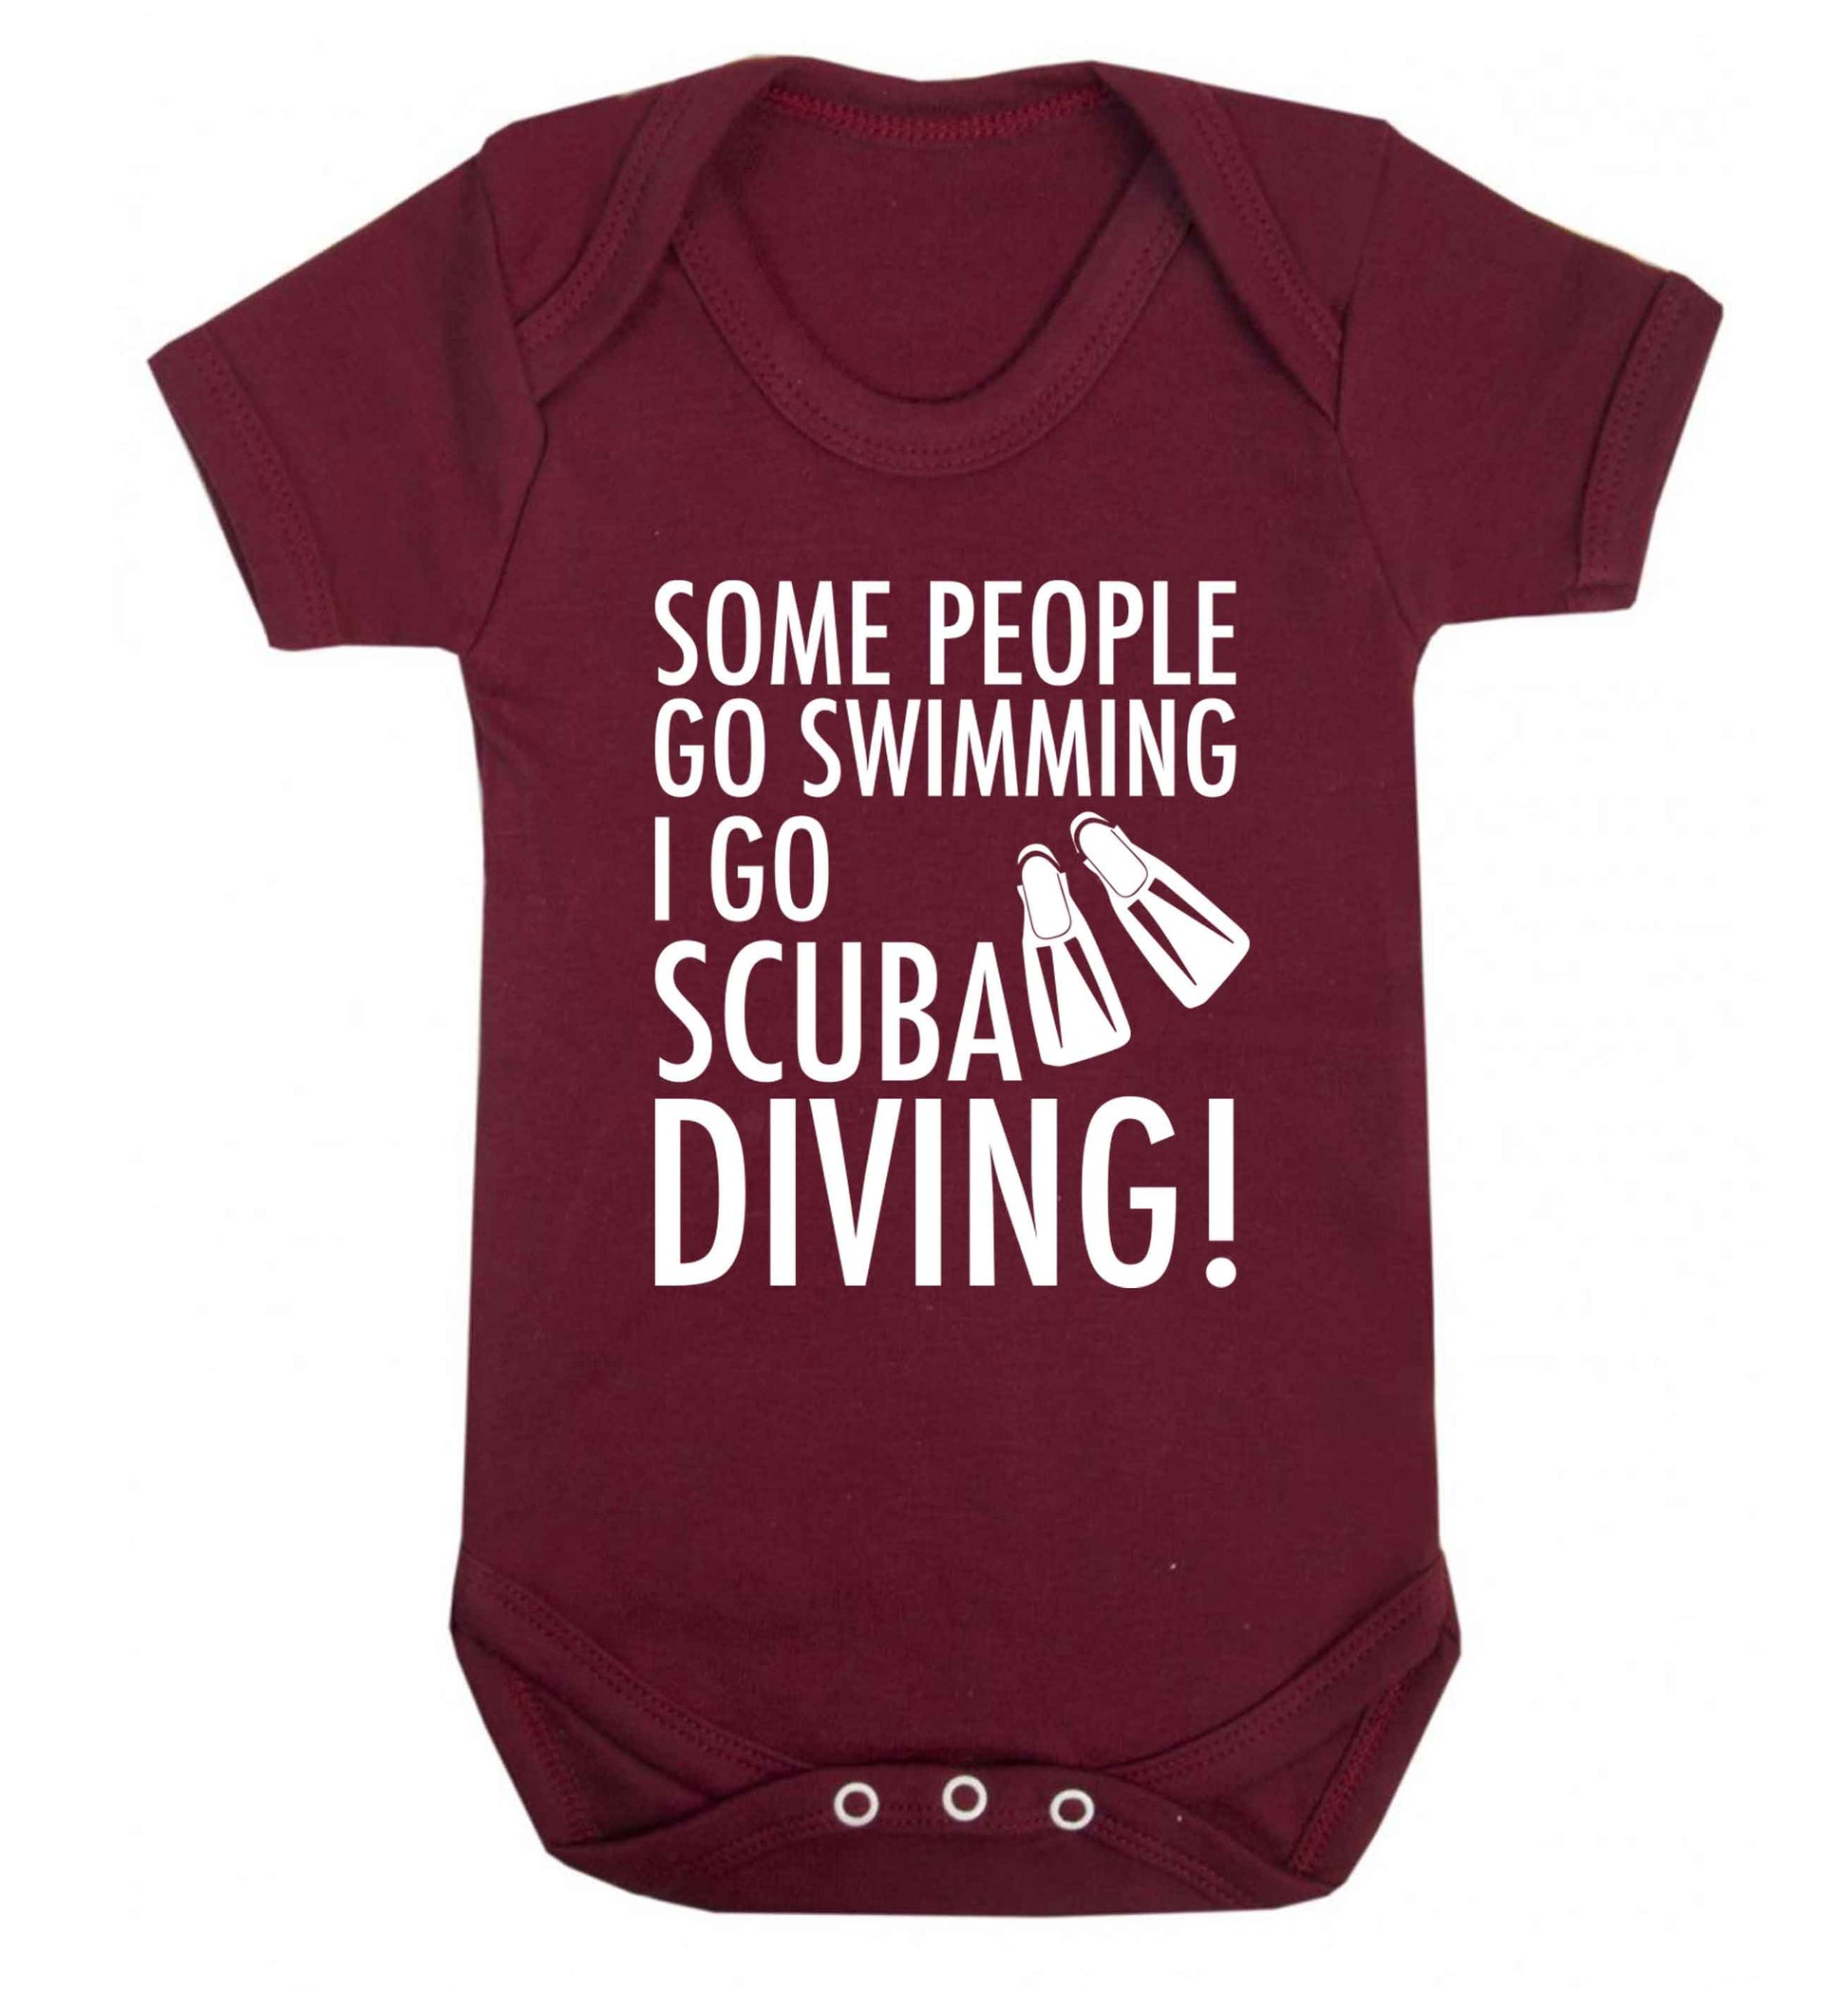 Some people go swimming I go scuba diving! Baby Vest maroon 18-24 months